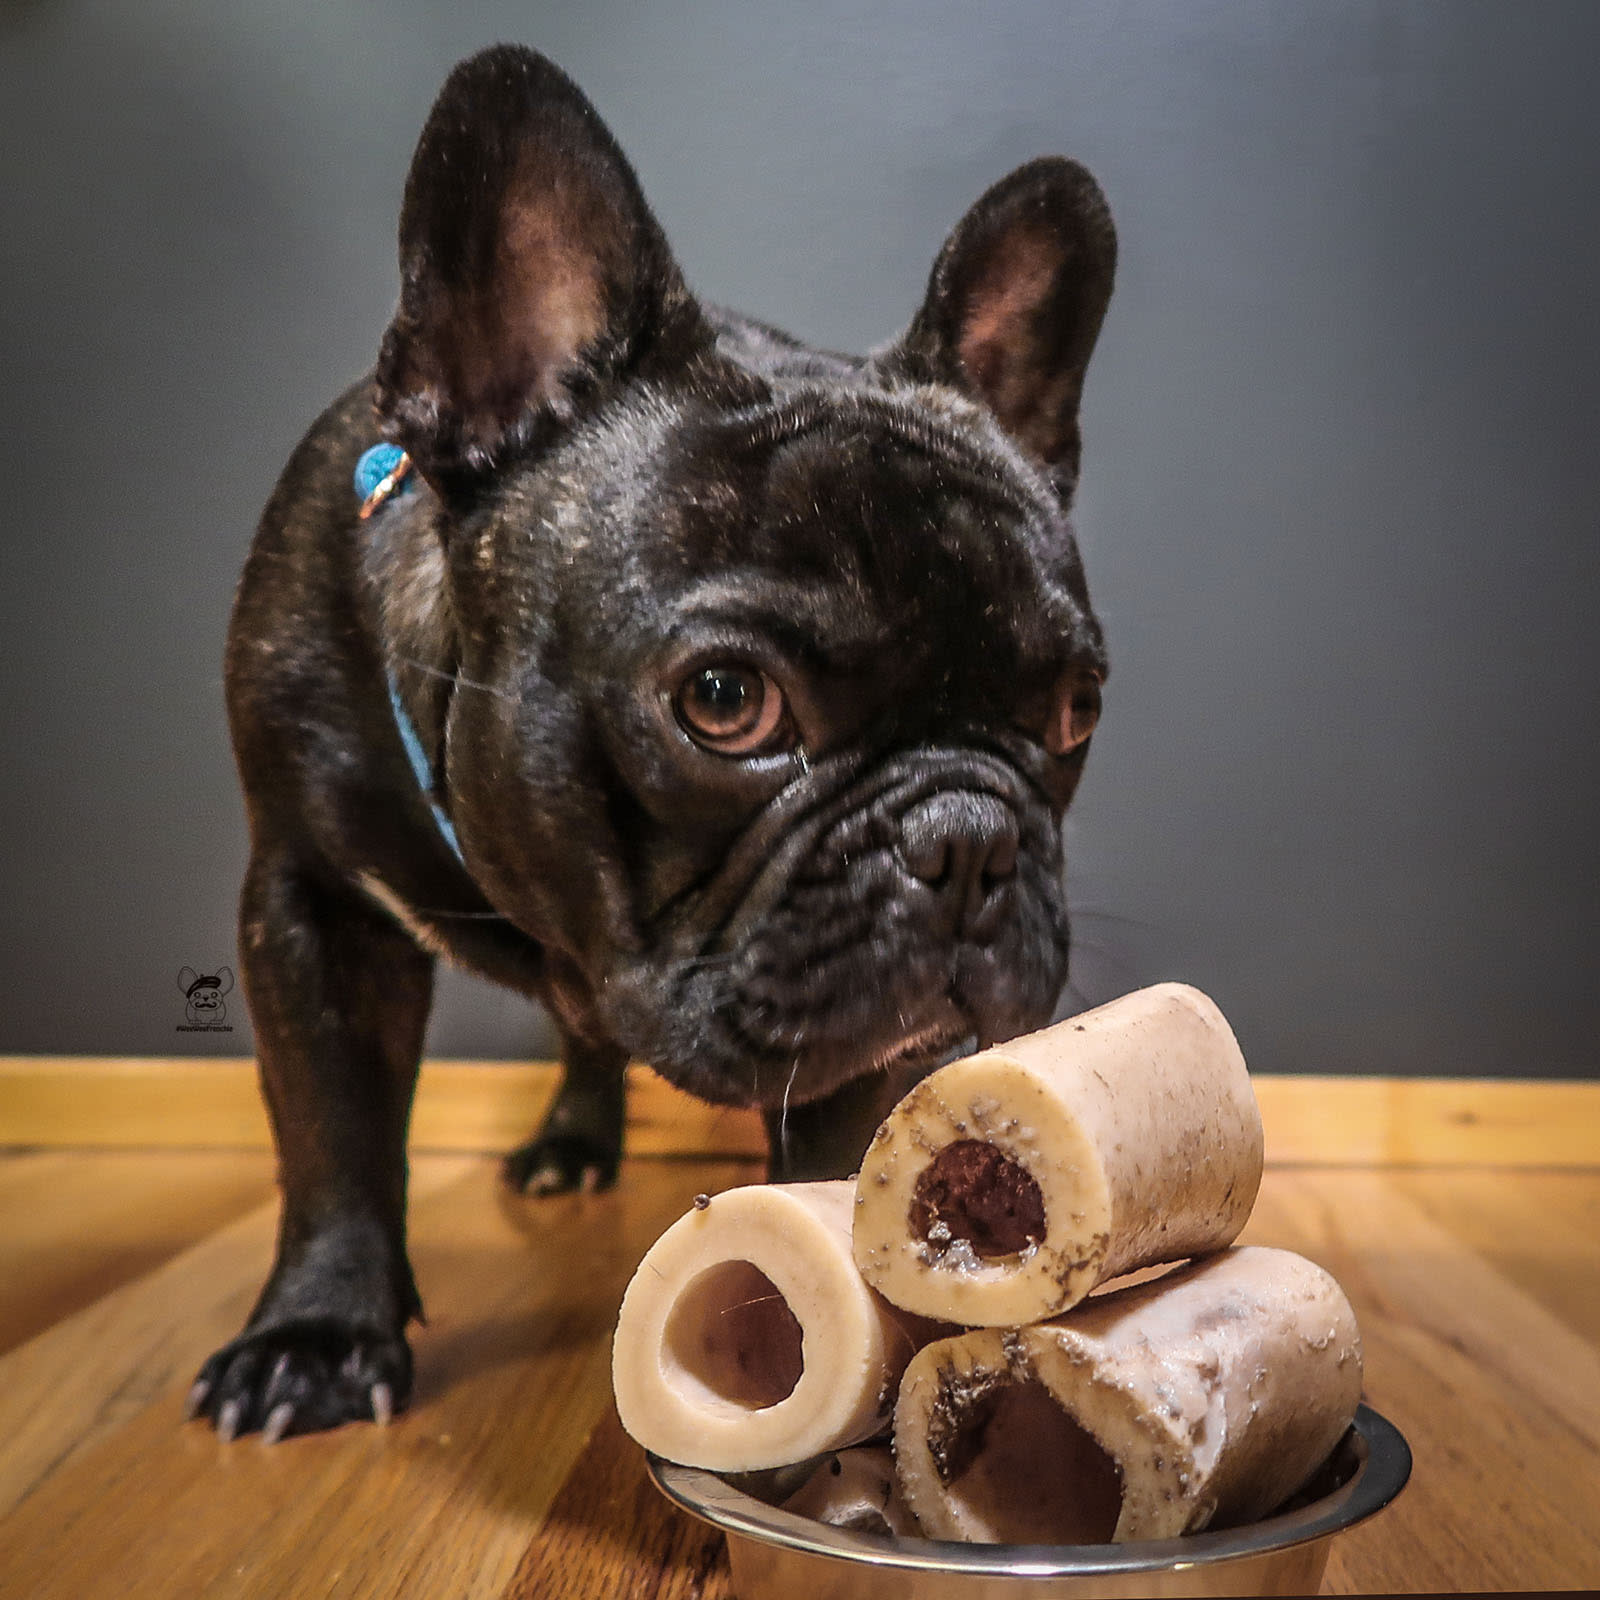 Want a Healthier Pup? 5 Reasons to Give Bone Broth to Your Dog